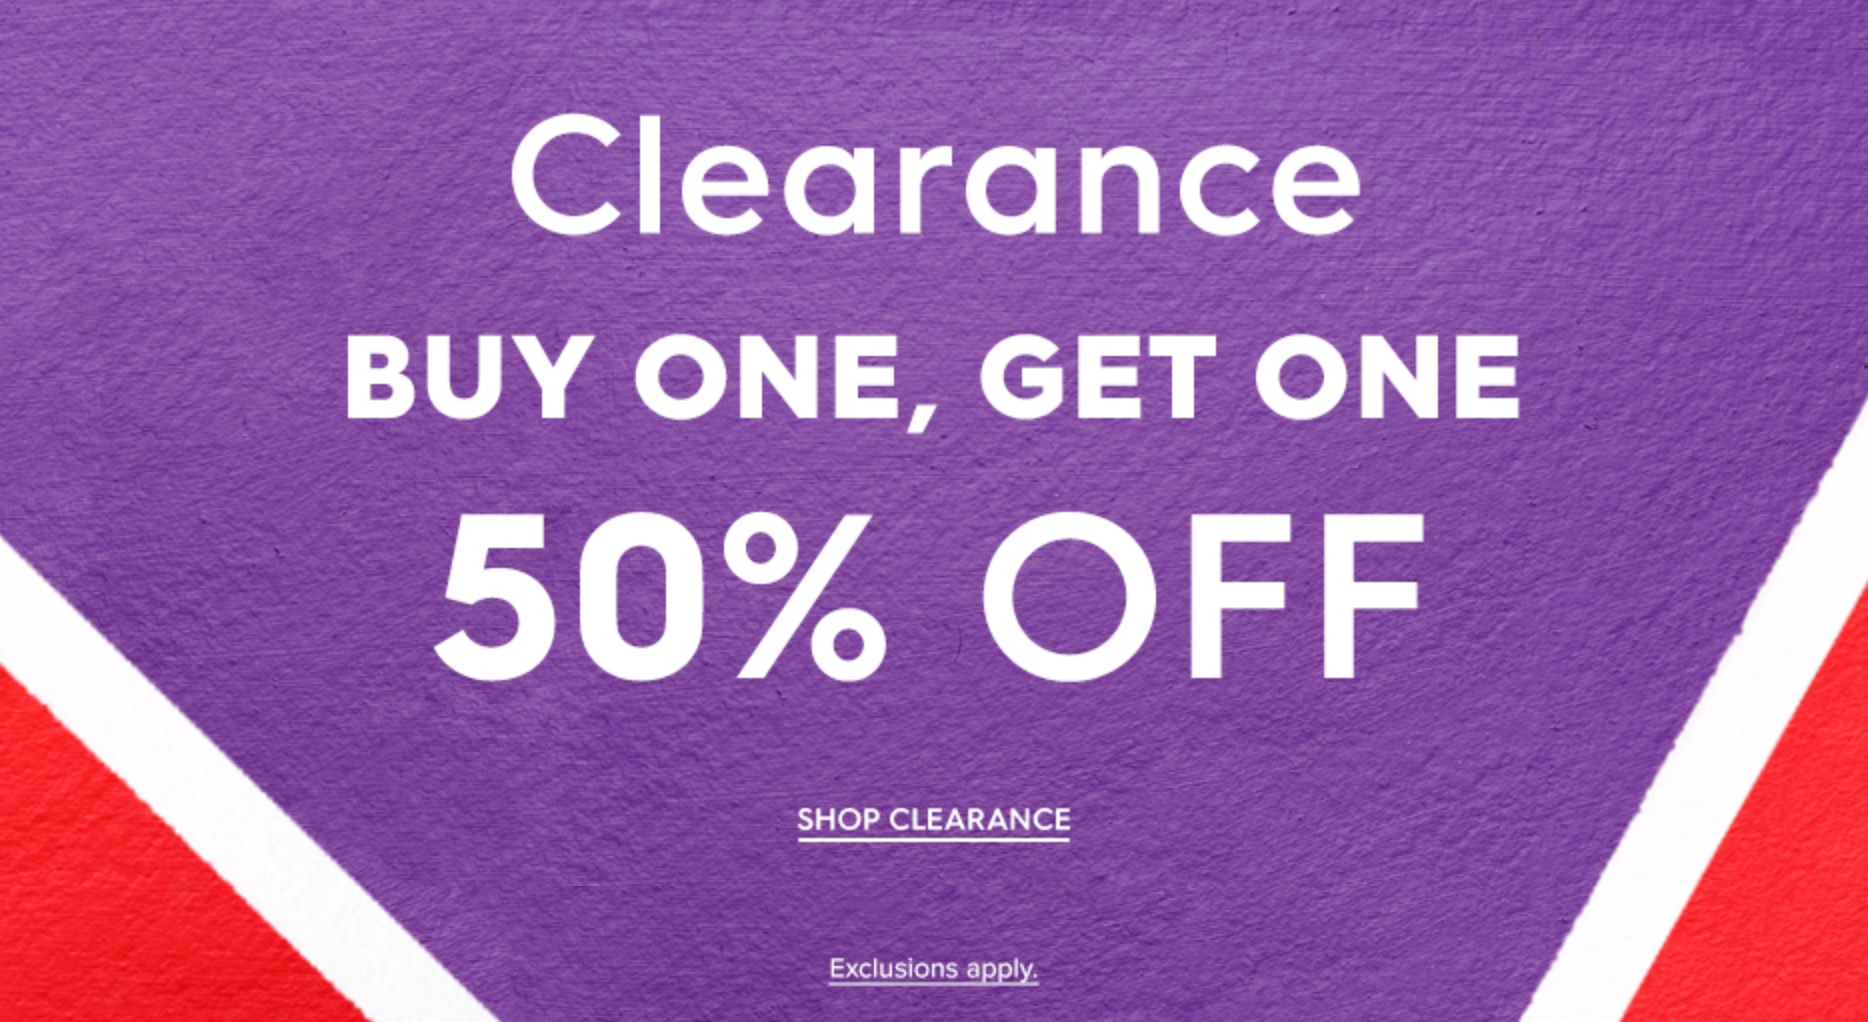 Famous Footwear Canada Sale: Buy 1 Get 1 50% OFF Clearance Including